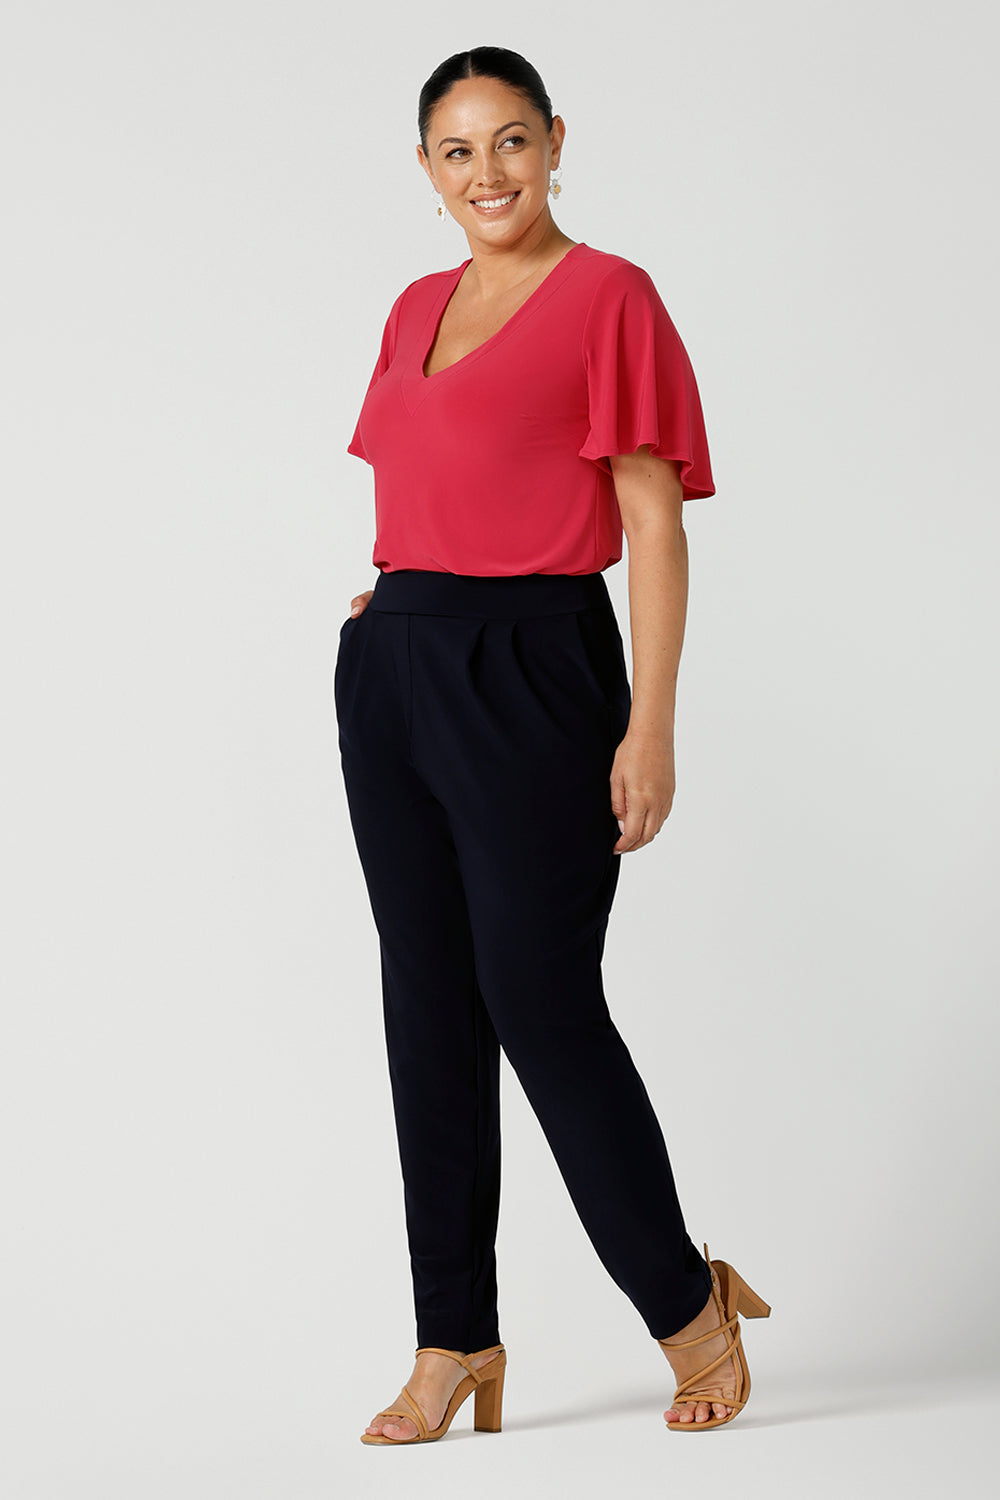 A happy size 12 woman wears jersey work pants in navy. Styled back with a fuchsia pink v-neck top. Comfortable corporate pants for women. Designed and made in Australia for Australian womenswear label Leina & Fleur. Inclusive size range 8 - 24. 